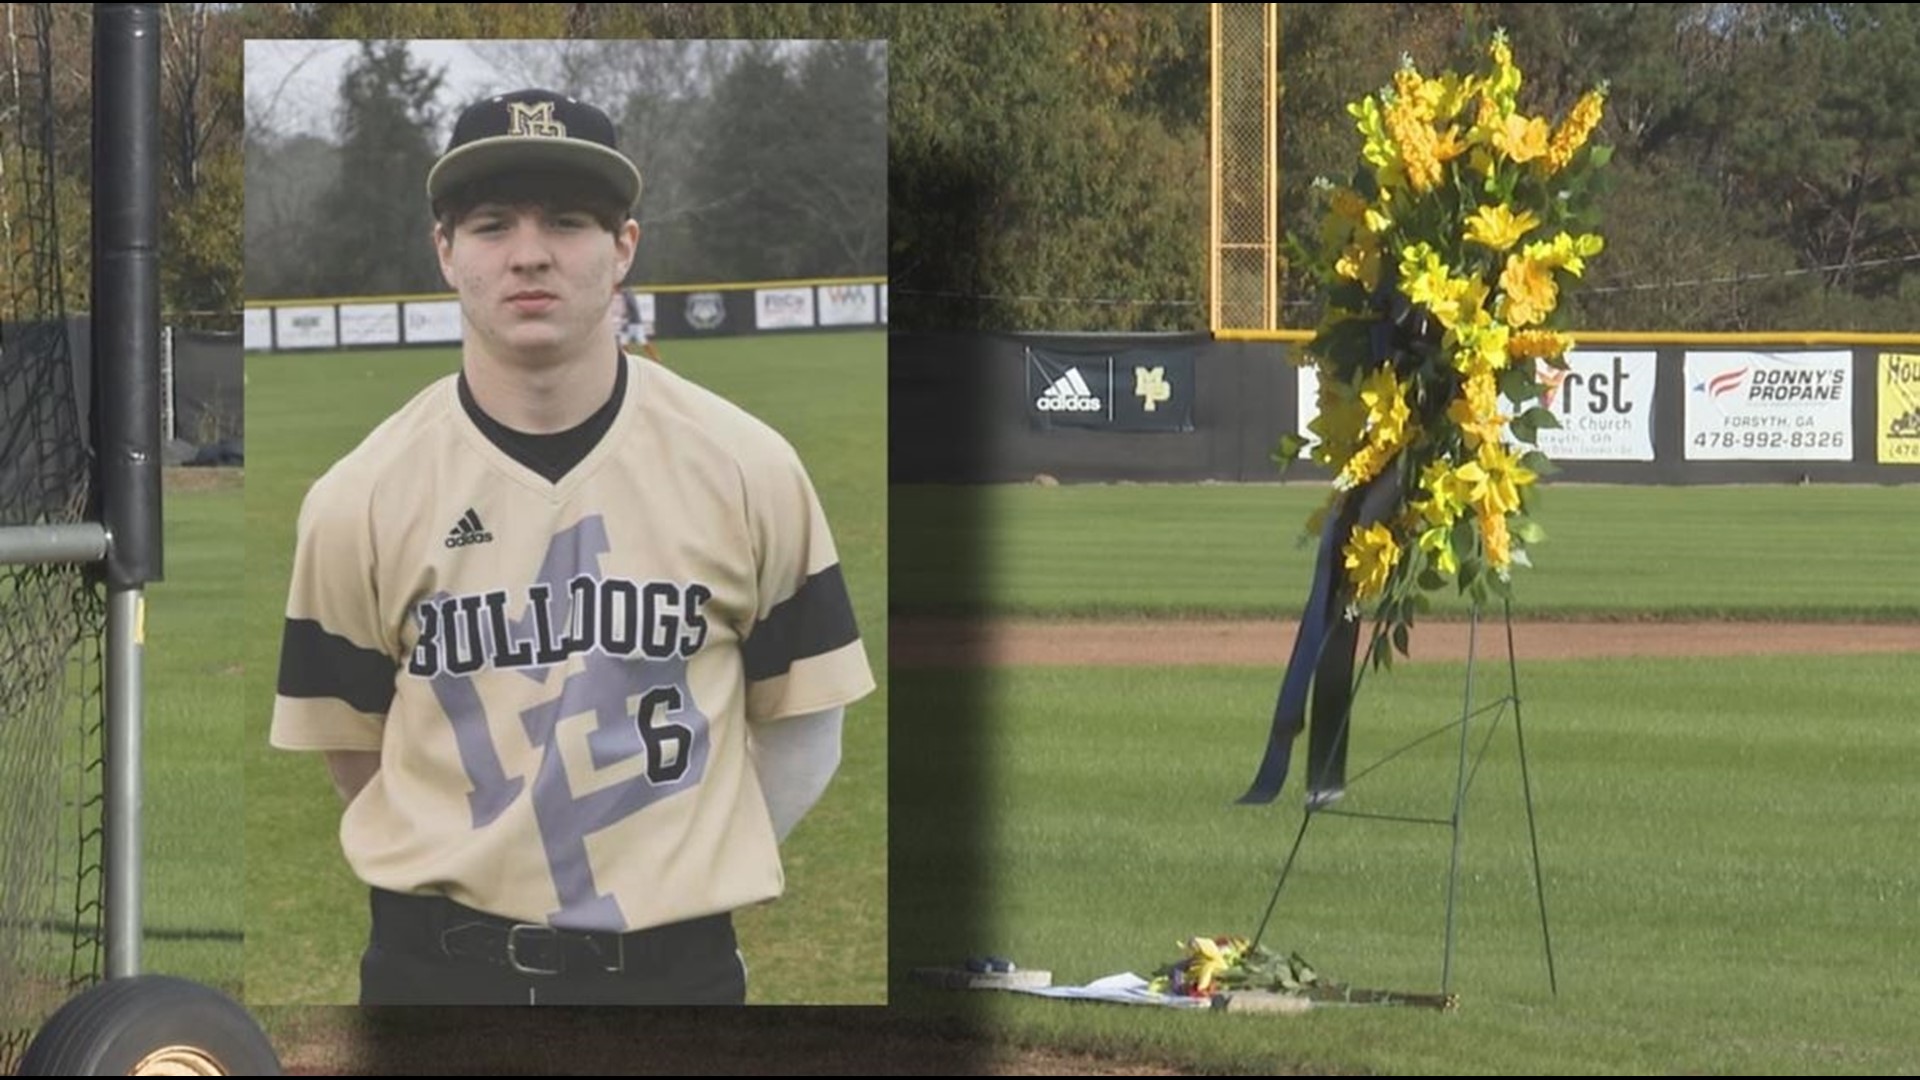 His former teacher says Swancey was the "life of the party" and played baseball with his "whole heart."